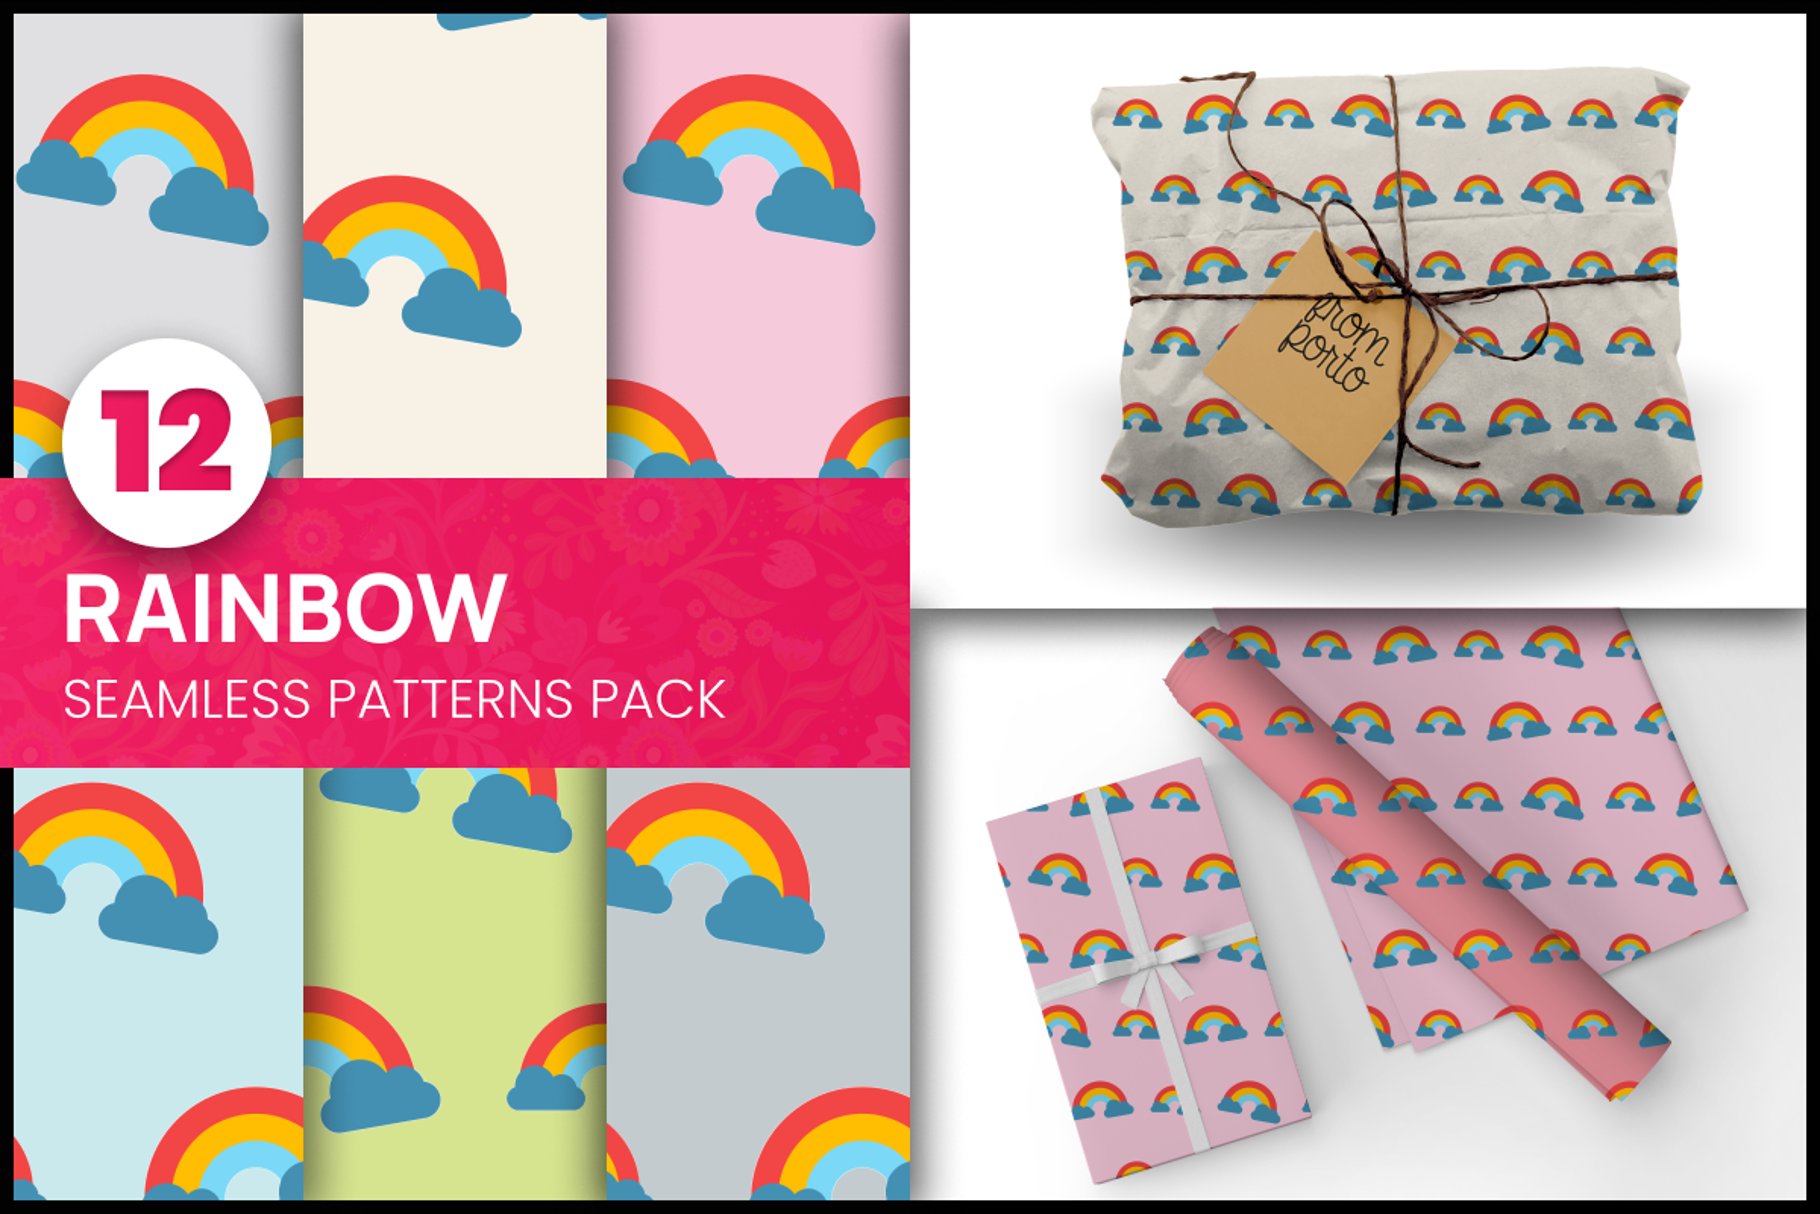 Rainbow Seamless Patterns cover image.